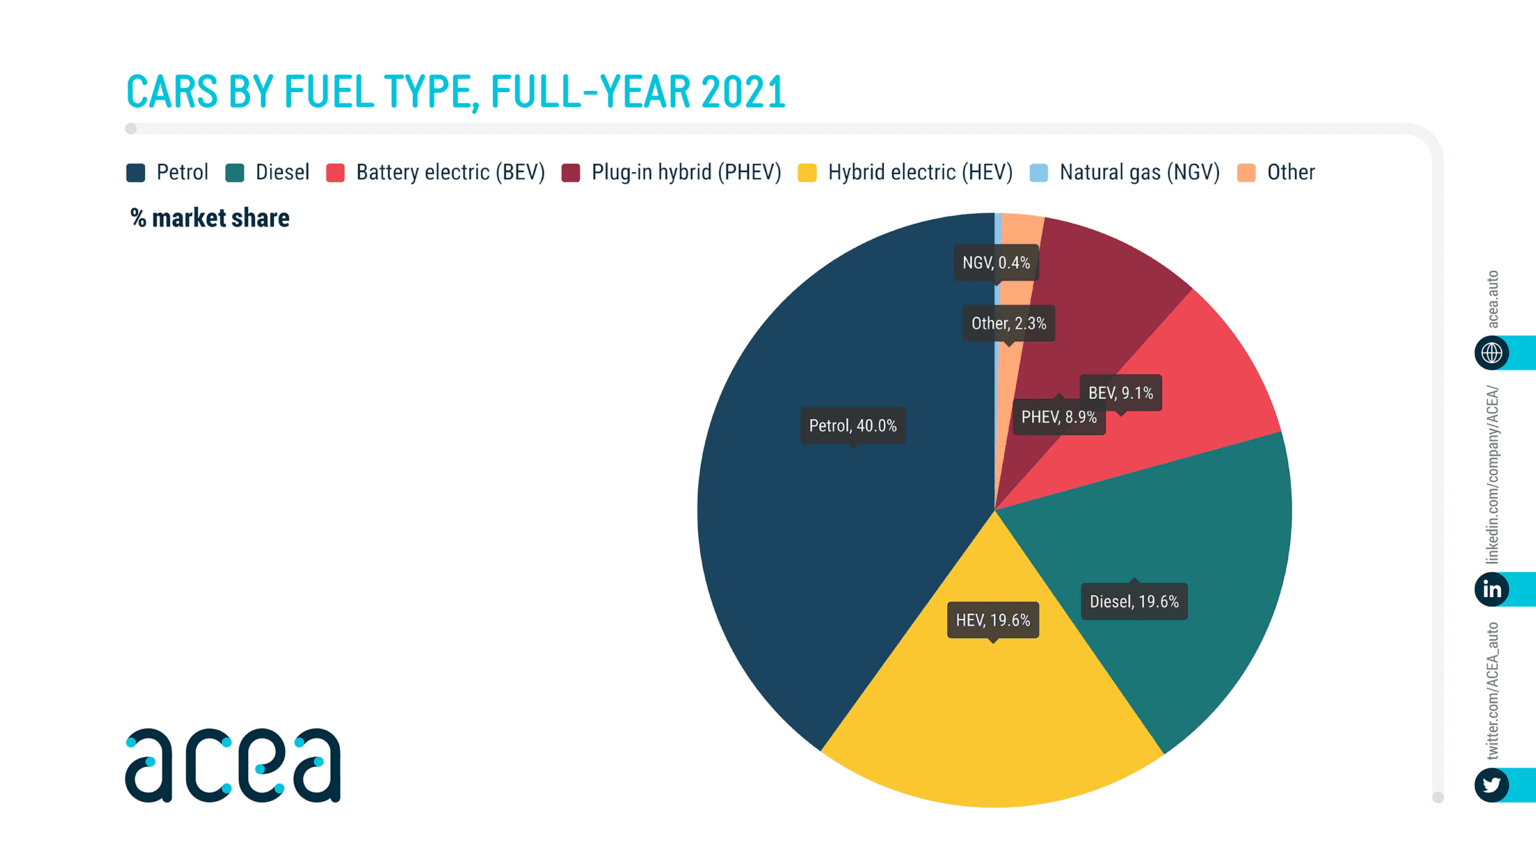 acea infographic on market share of cars by fuel type in 2021